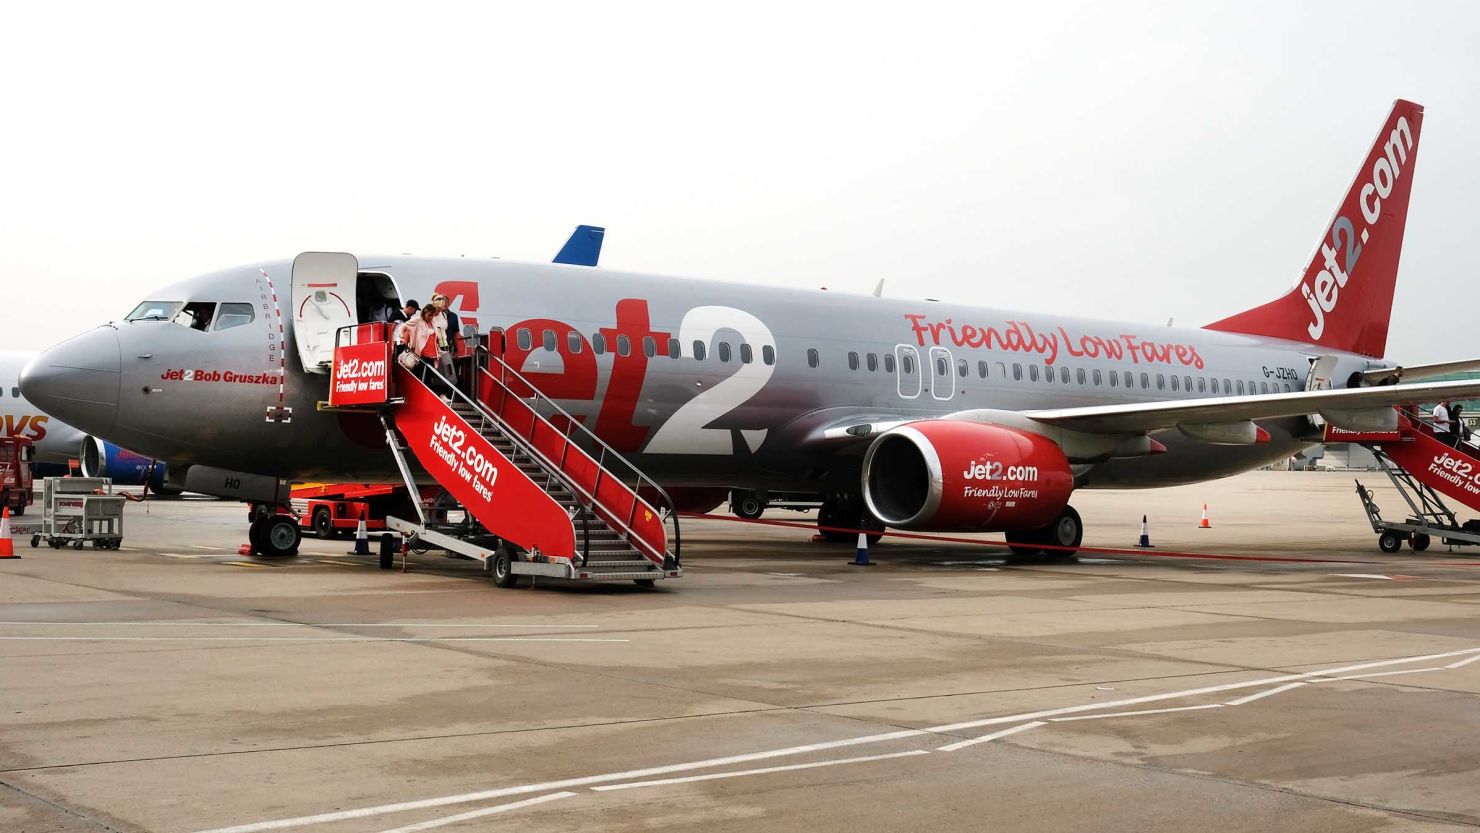 Airline passengers disembark from a Jet2 aircraft at London Stansted Airport in May 2018.